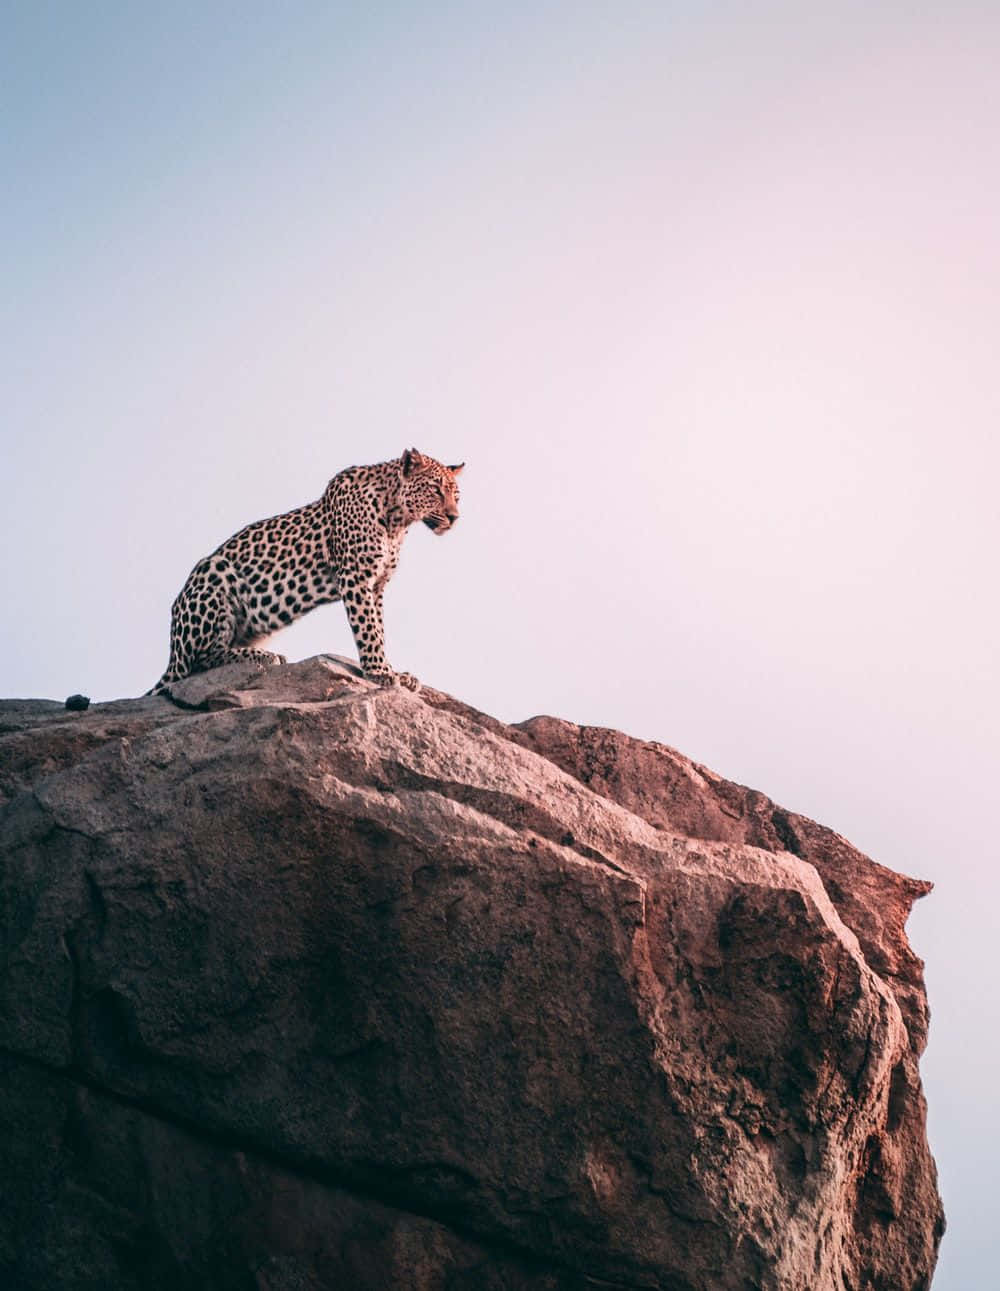 Captivating Cheetah Gazes Into The Distance